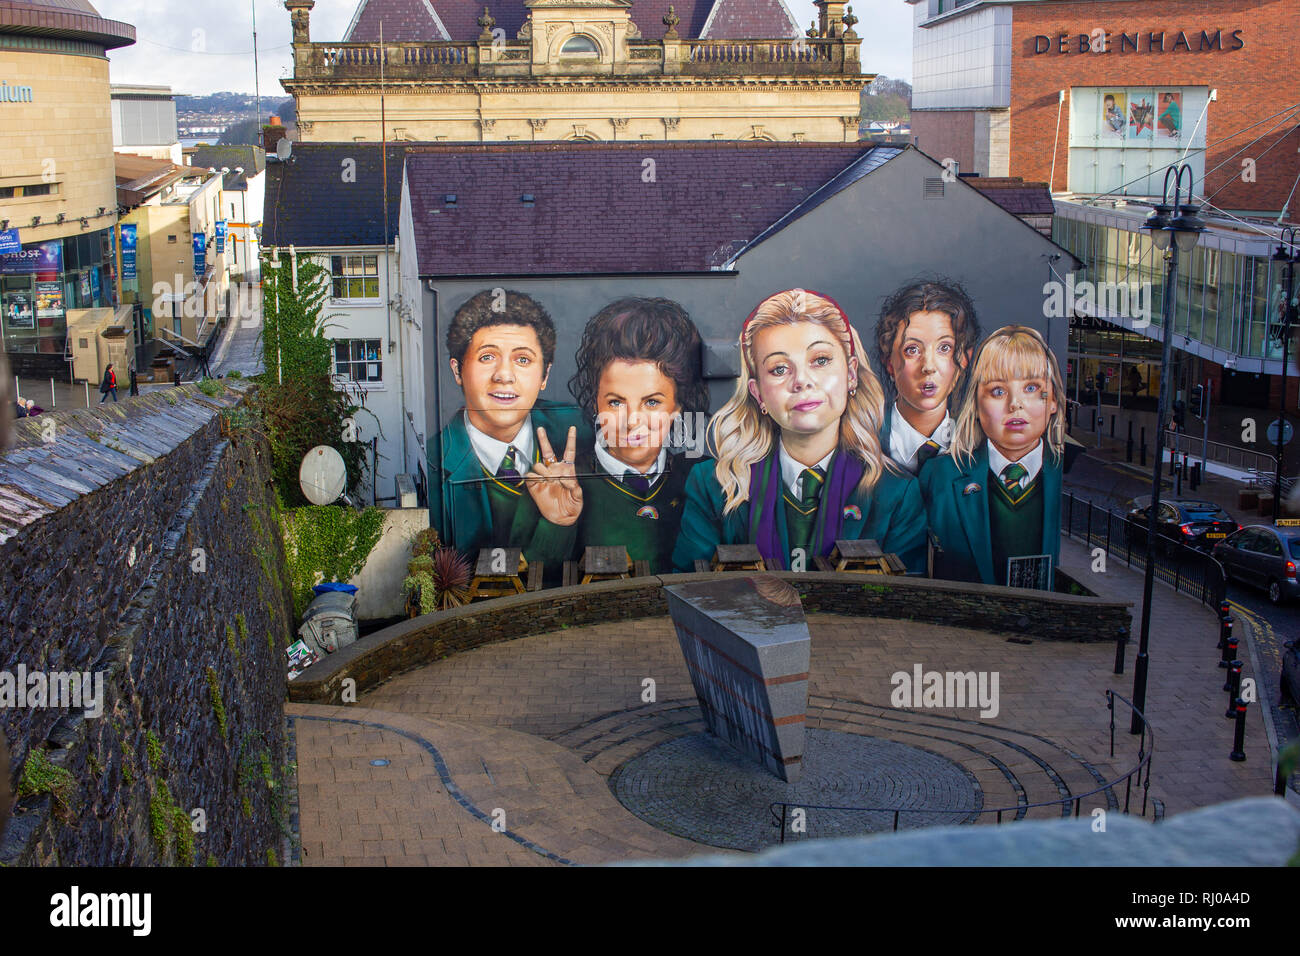 Derry, Northern Ireland - January 29 2019: Mural on a pub depicting the main characters in Channel 4's tv show 'Derry Girls' Stock Photo